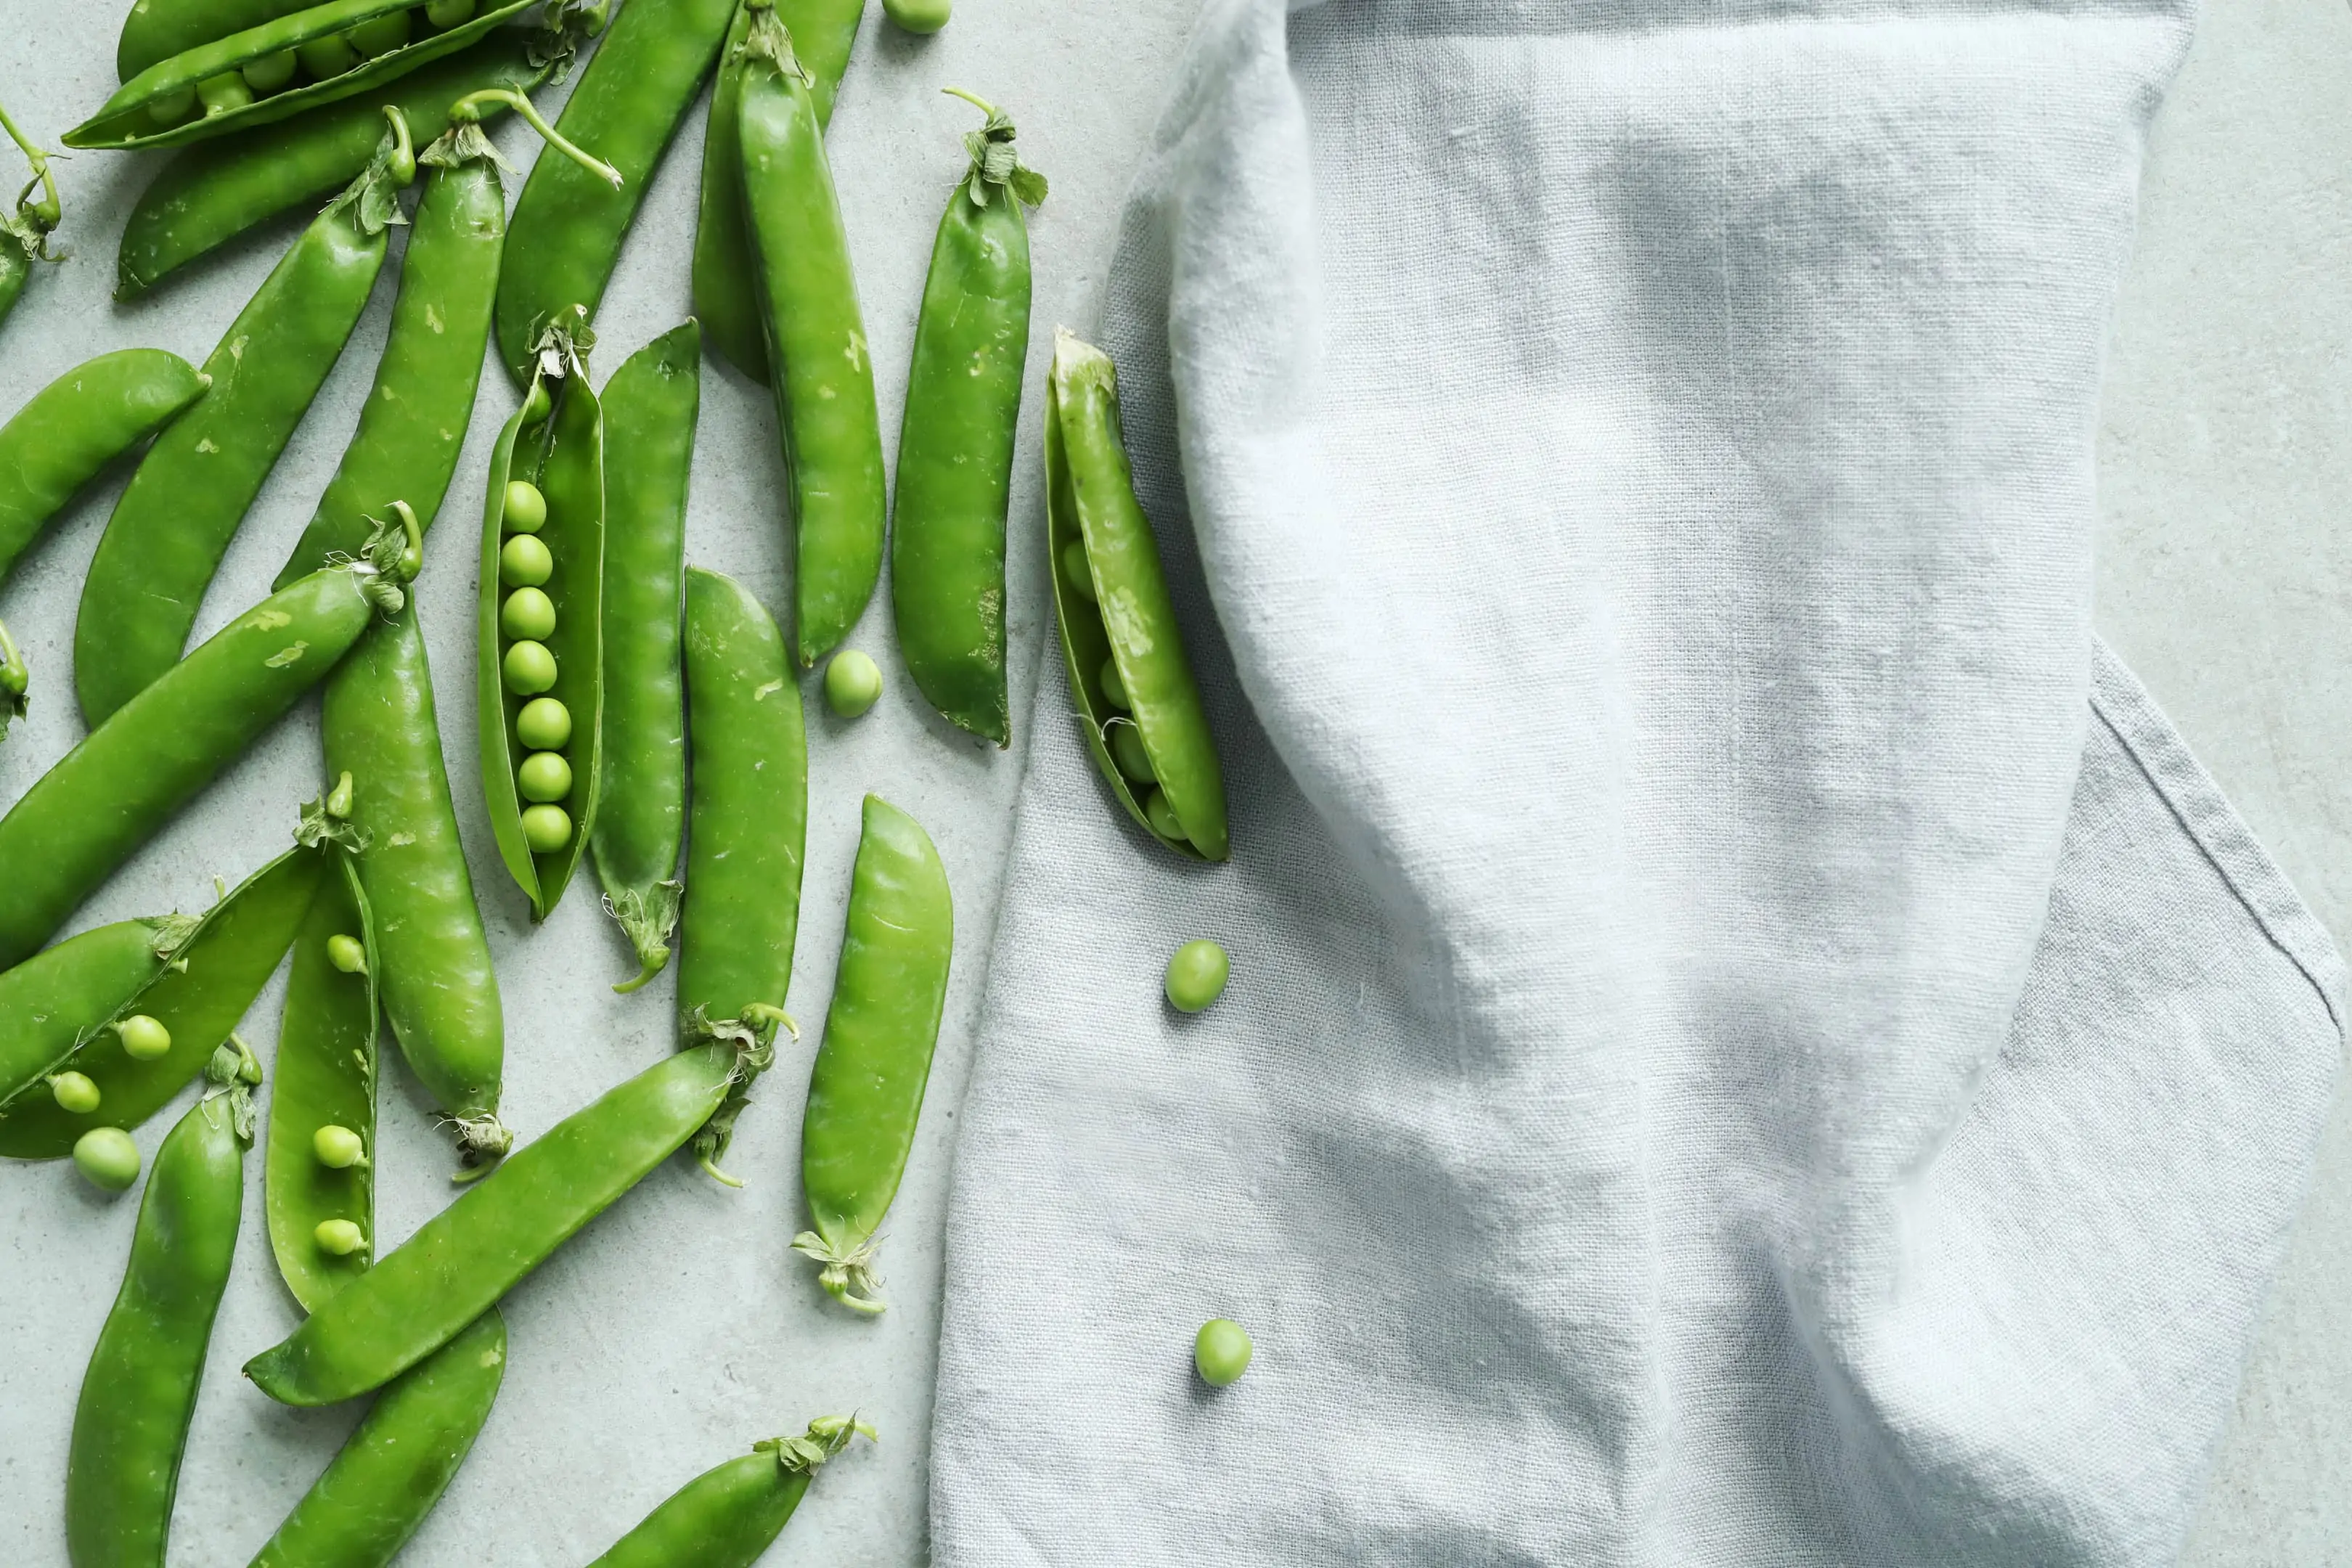 Green peas with pods